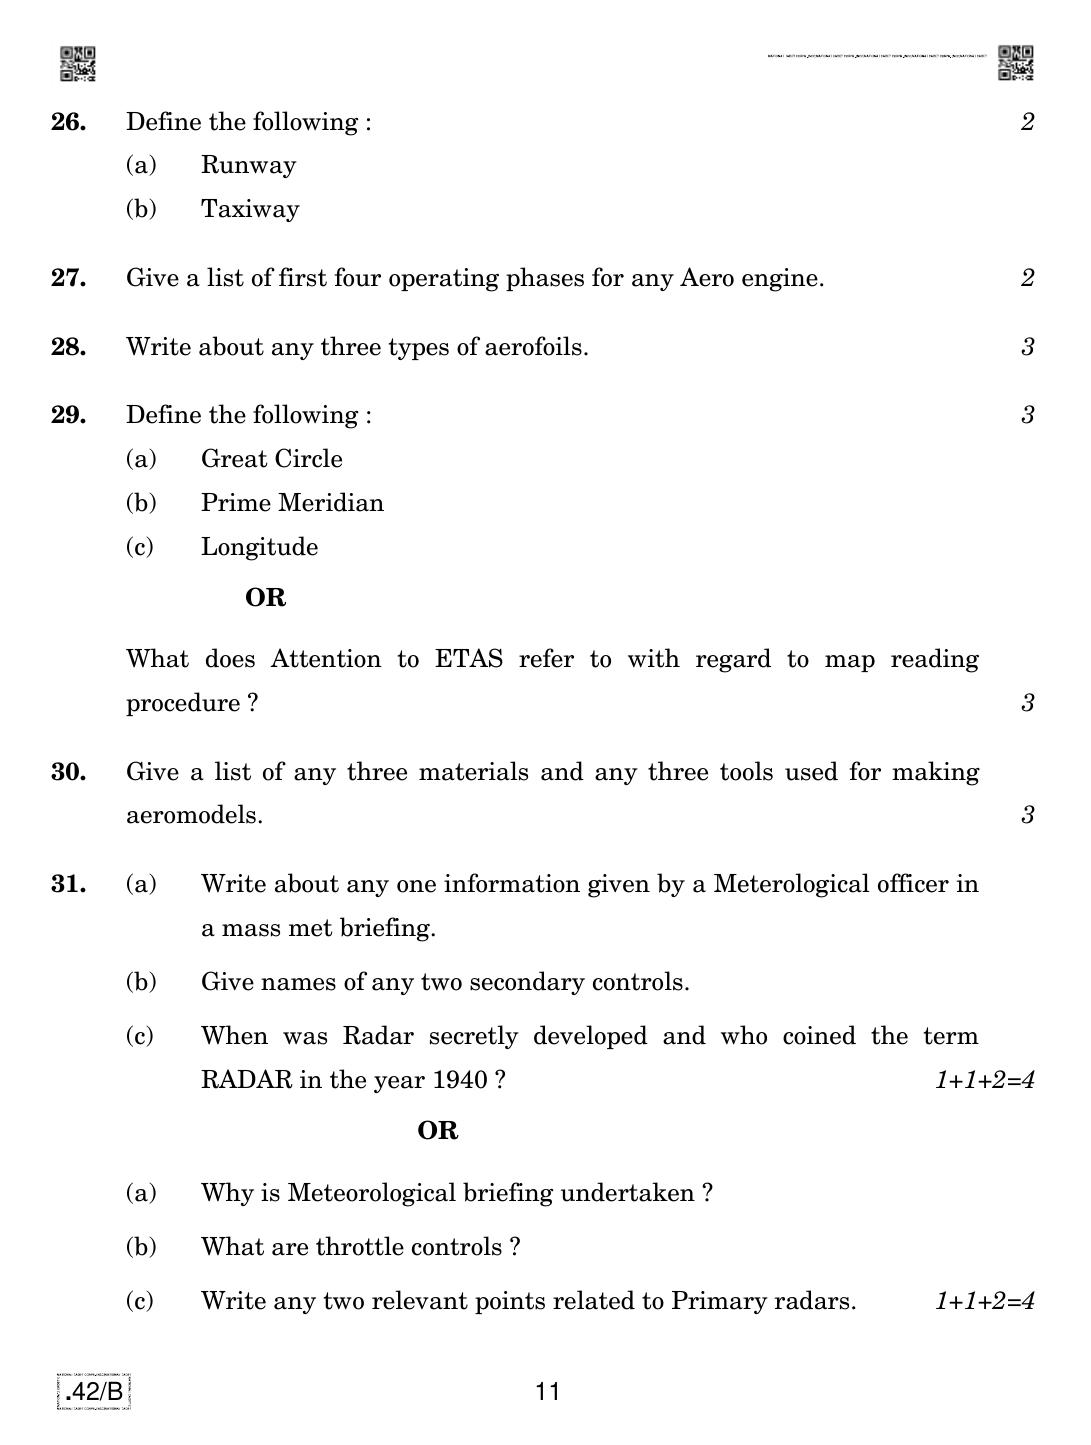 CBSE Class 12 NCC 2020 Compartment Question Paper - Page 11